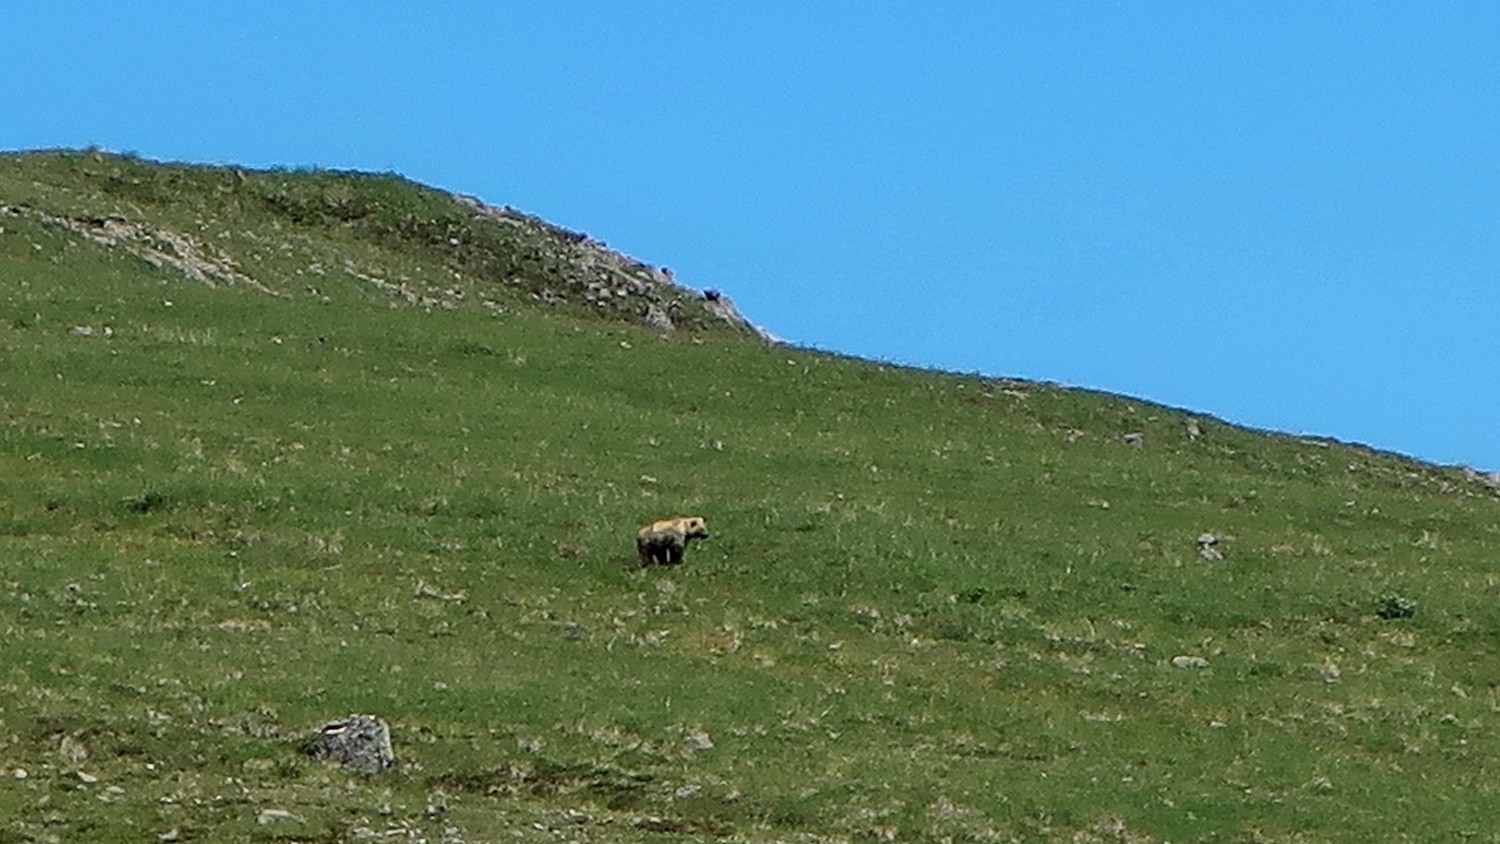 Grizzly on the way to Mount Galen